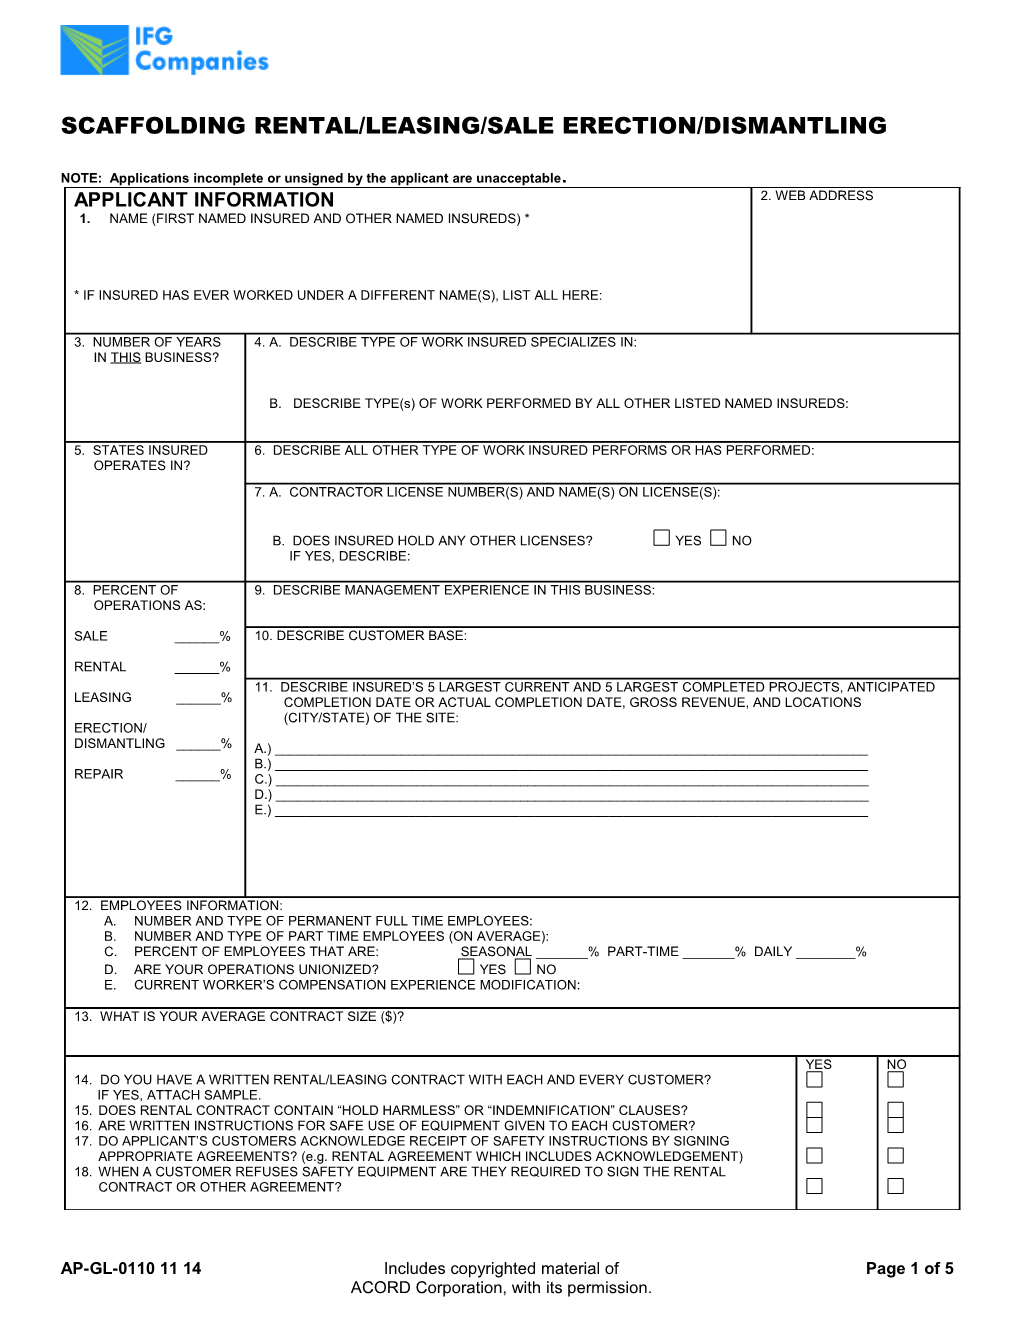 Products Liability Application s1